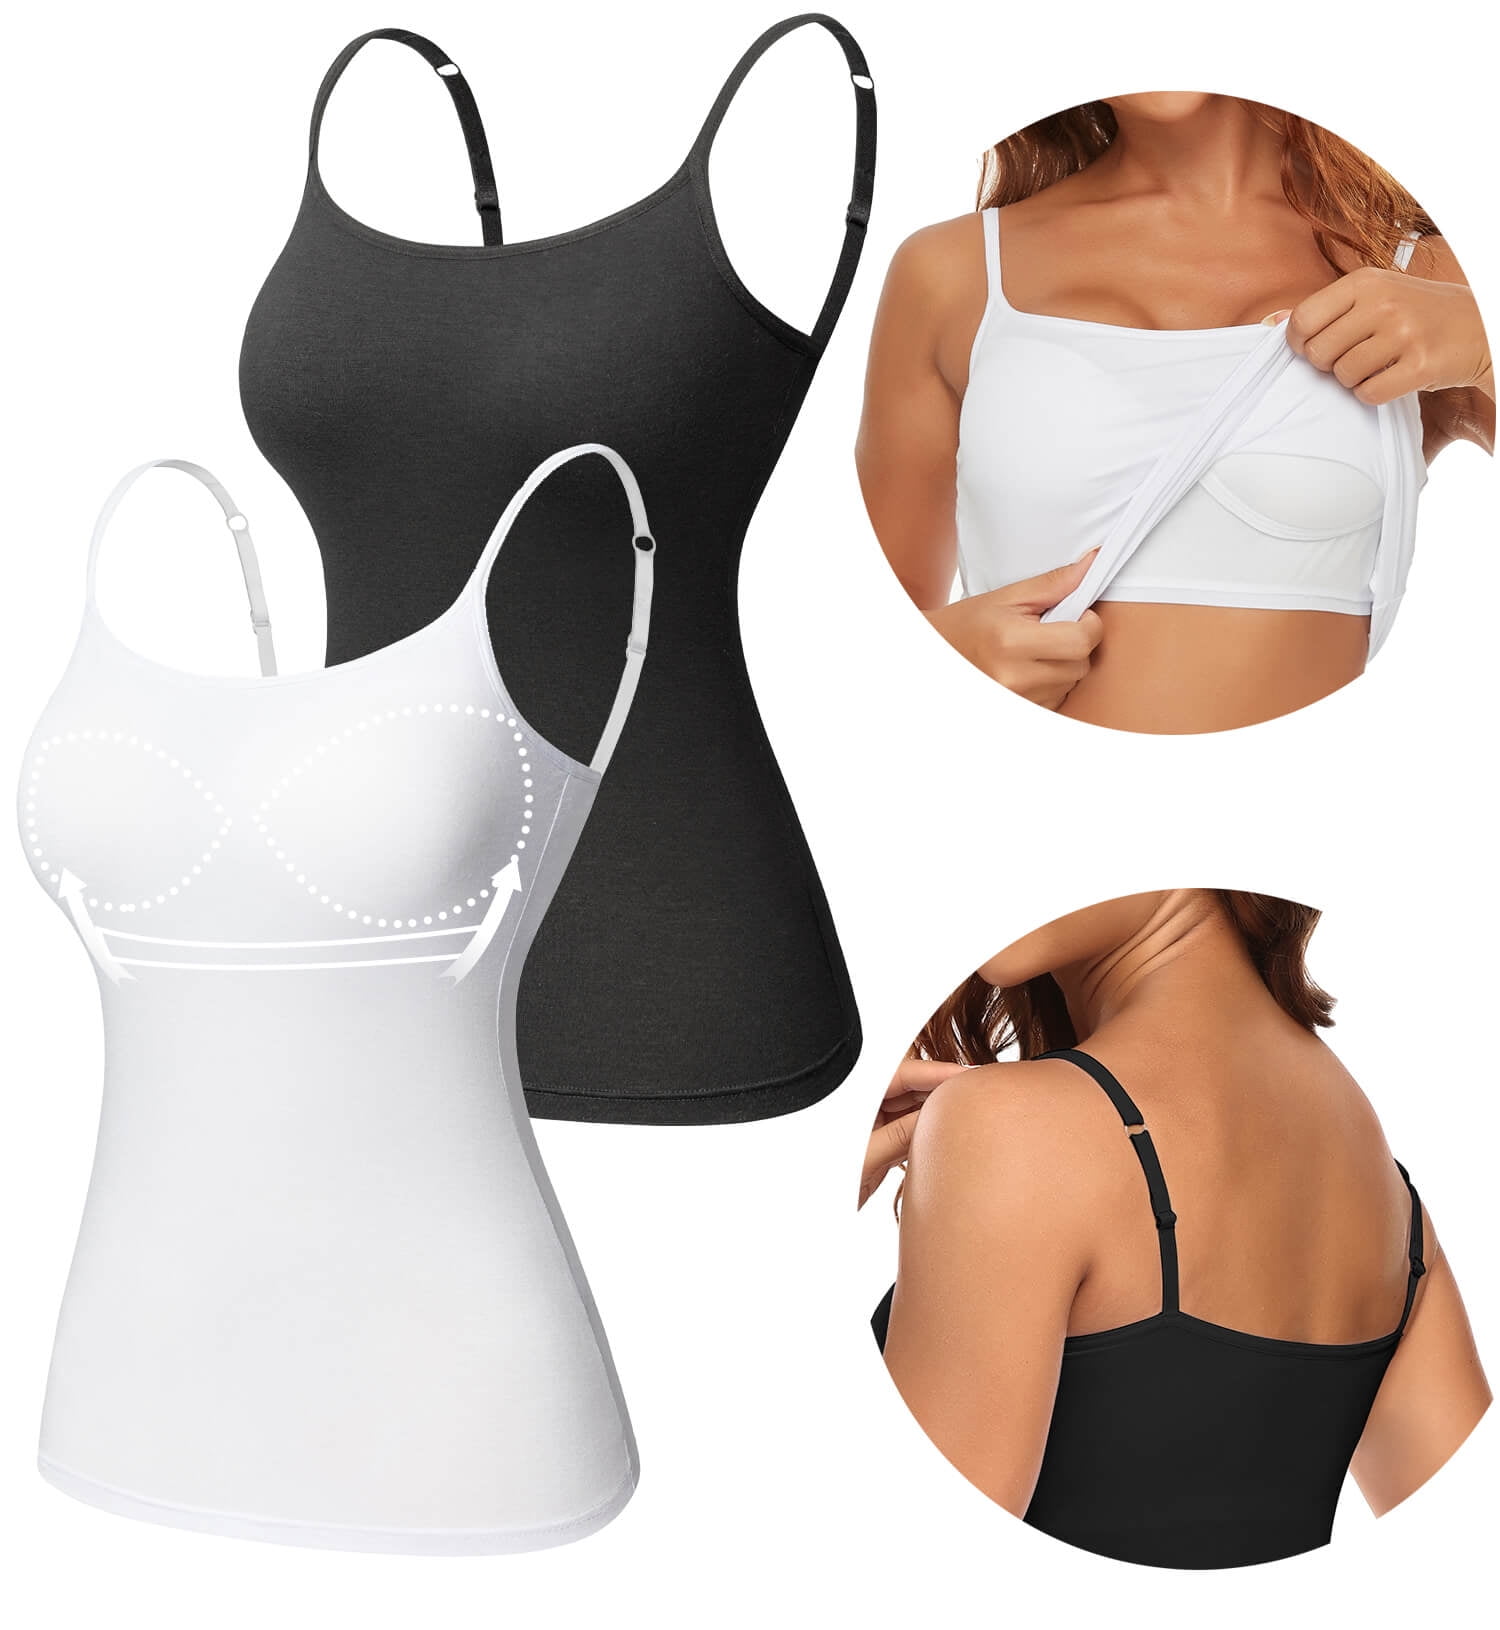 yievot Women's Camisole with Built in Padded Bra Spaghetti Strap